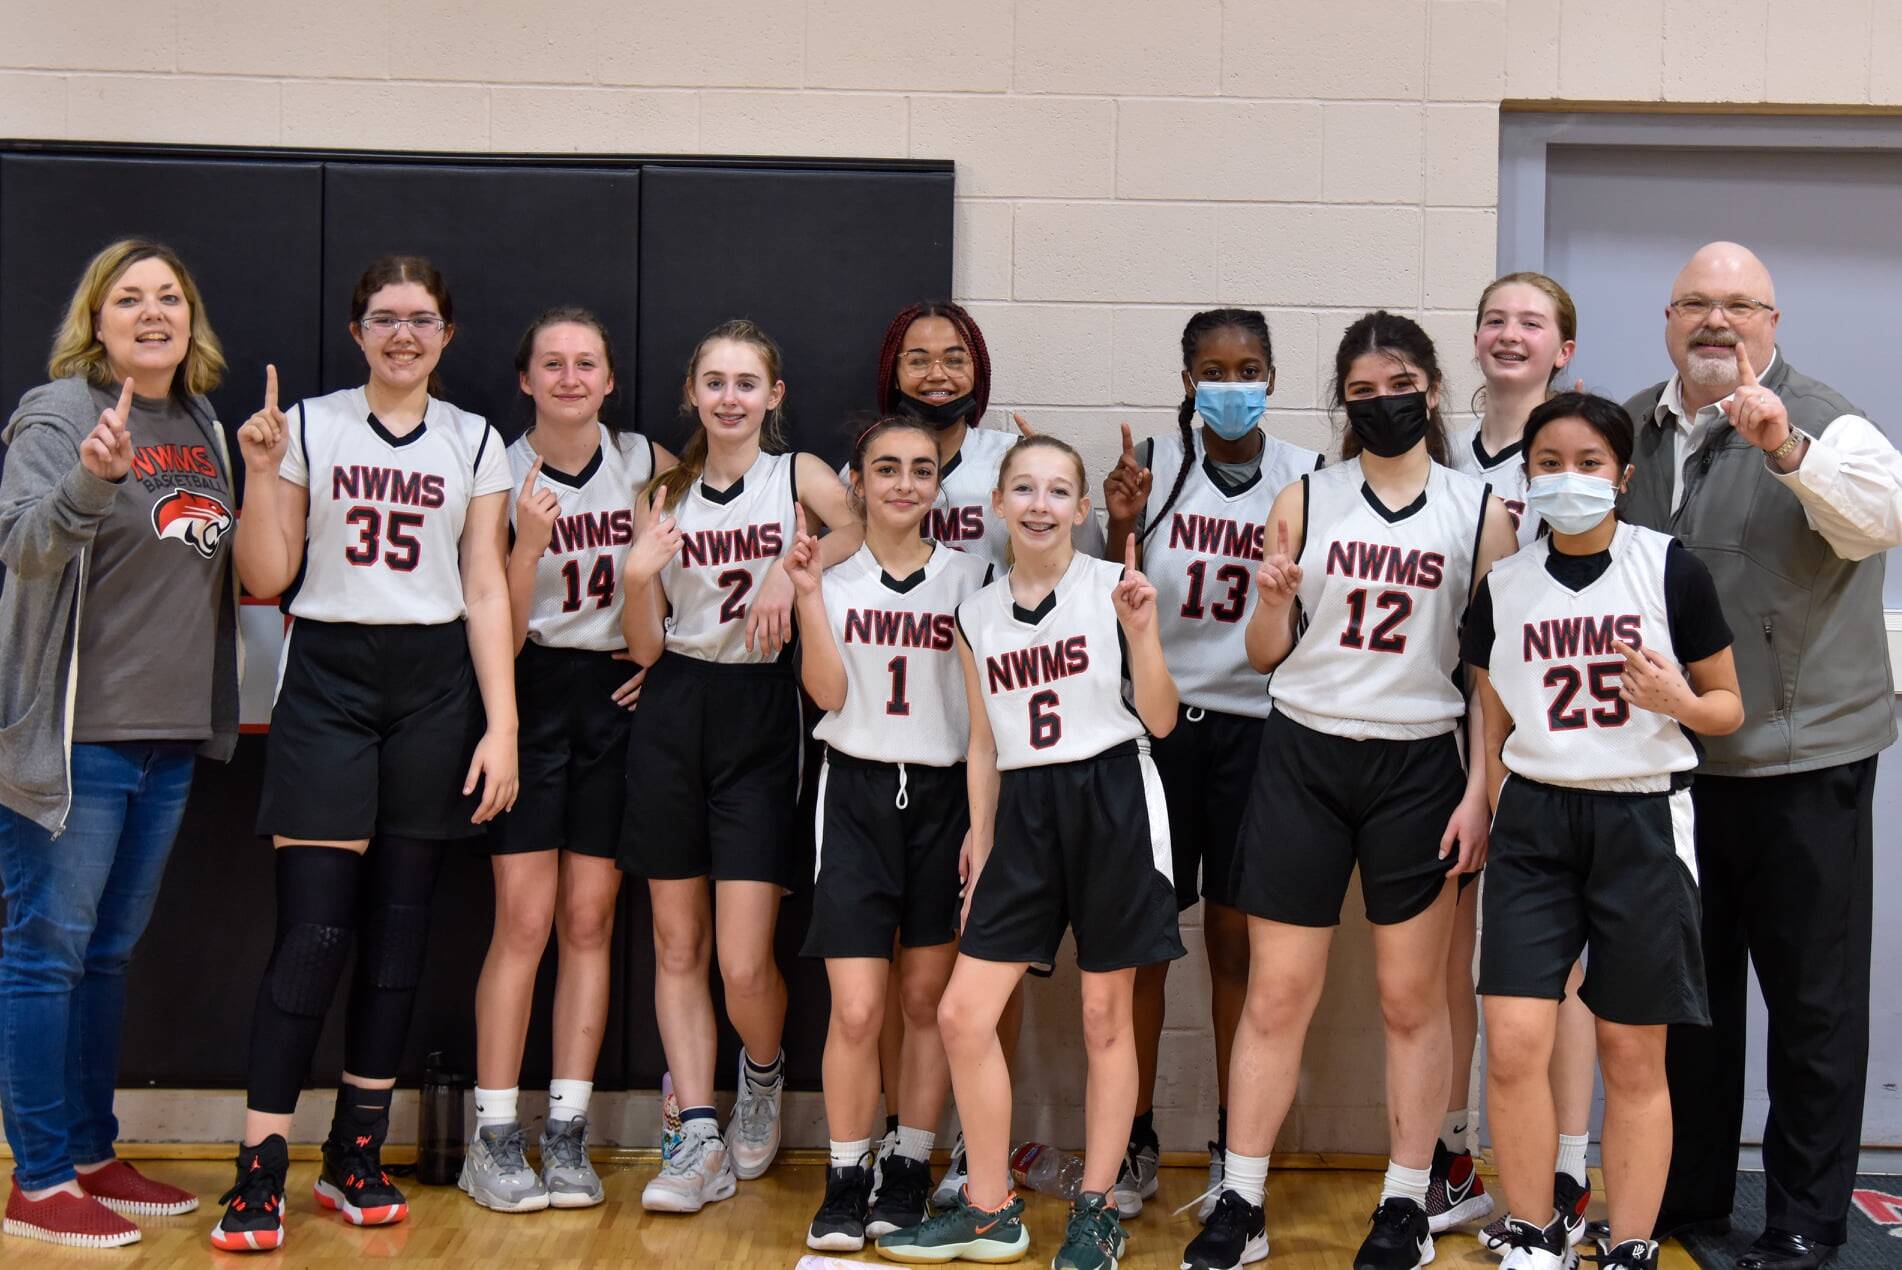 Photo by Conor Laffey
North Whidbey Middle School’s eighth grade girls basketball team went undefeated this season, the first girls team to do so in the middle school’s history.